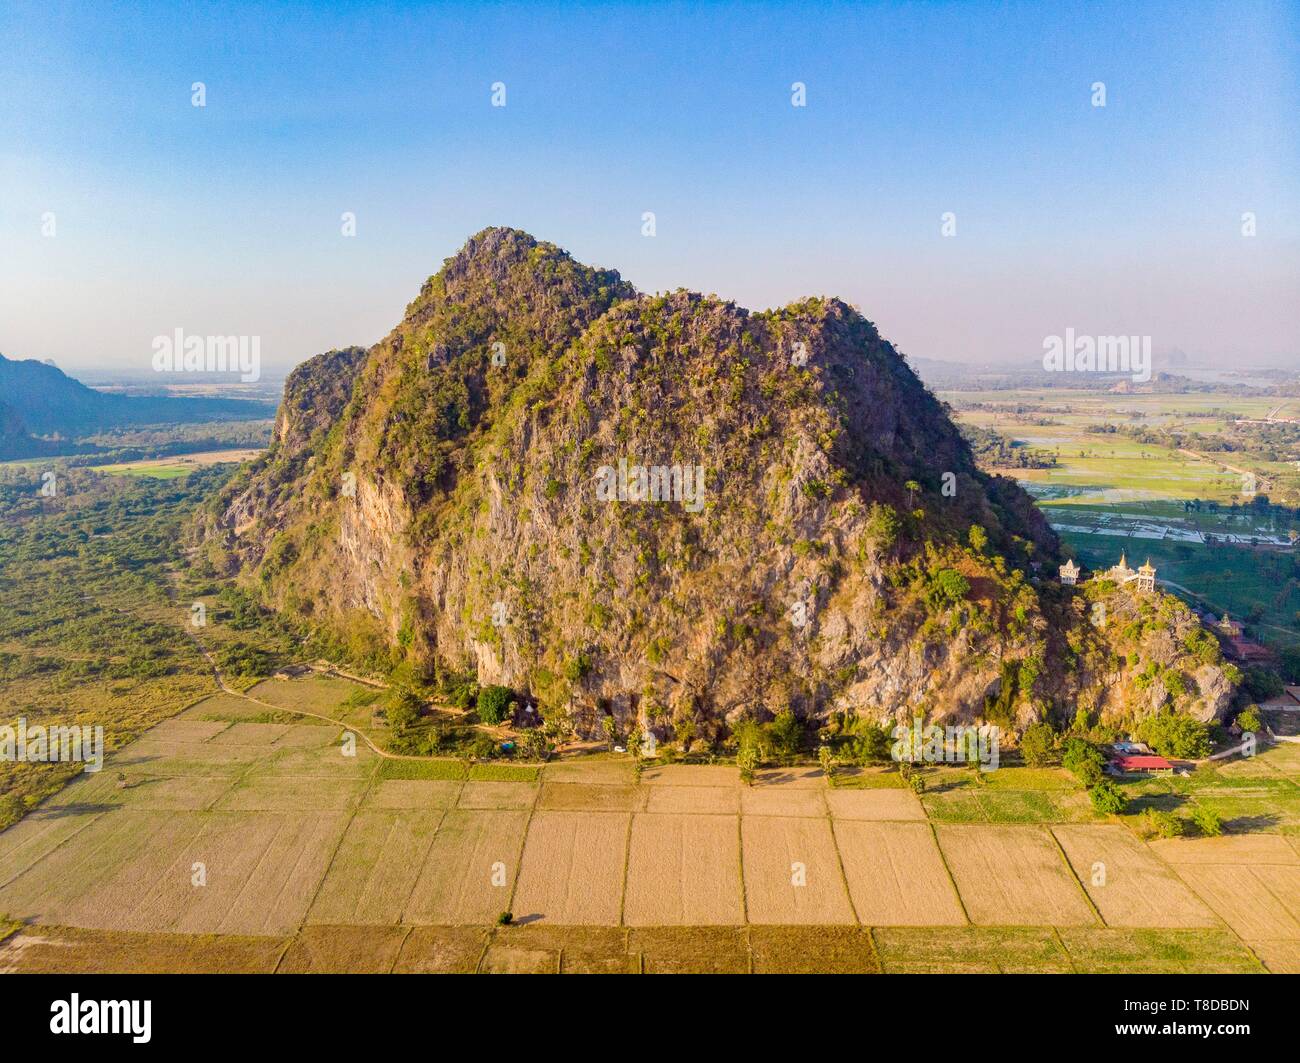 Myanmar (Burma), Karen State, Hpa An, karst cave formation of Kaw Gon or Kaw Goon (aerial view) Stock Photo